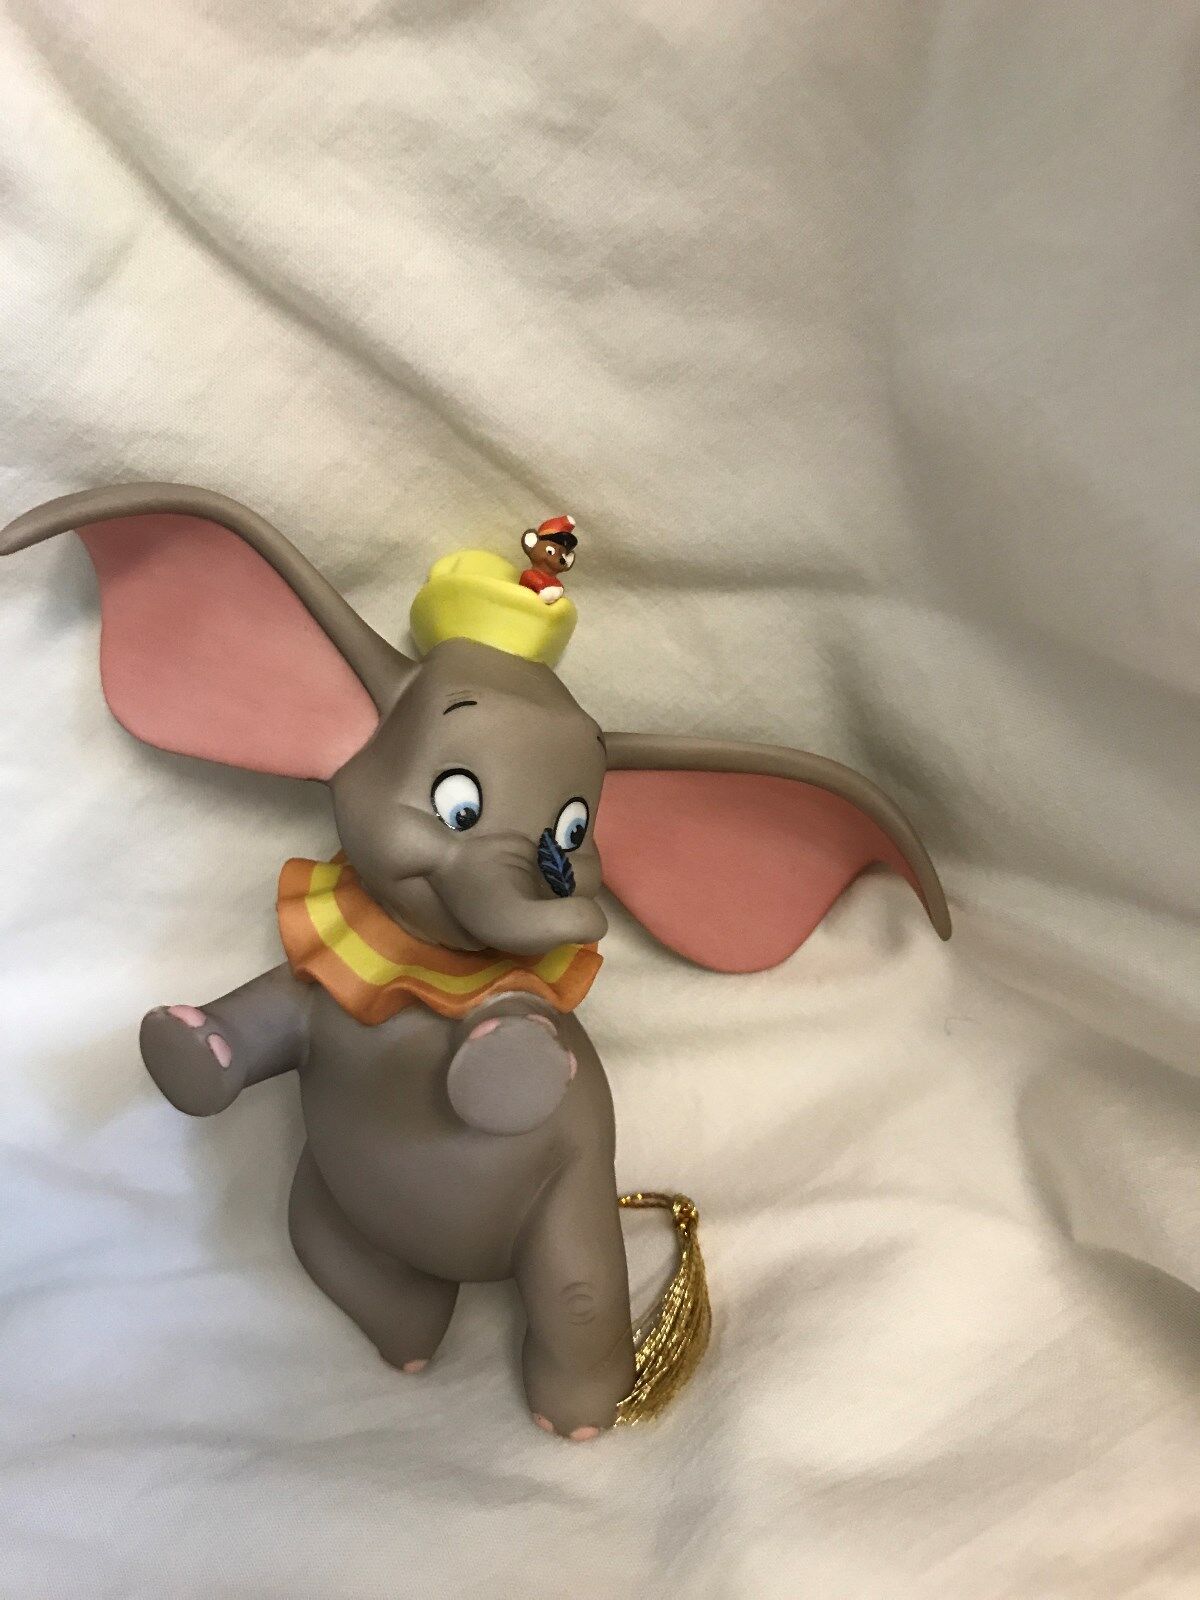 WDCC When I See An Elephant Fly Dumbo Porcelain Ornament w/COA and Box